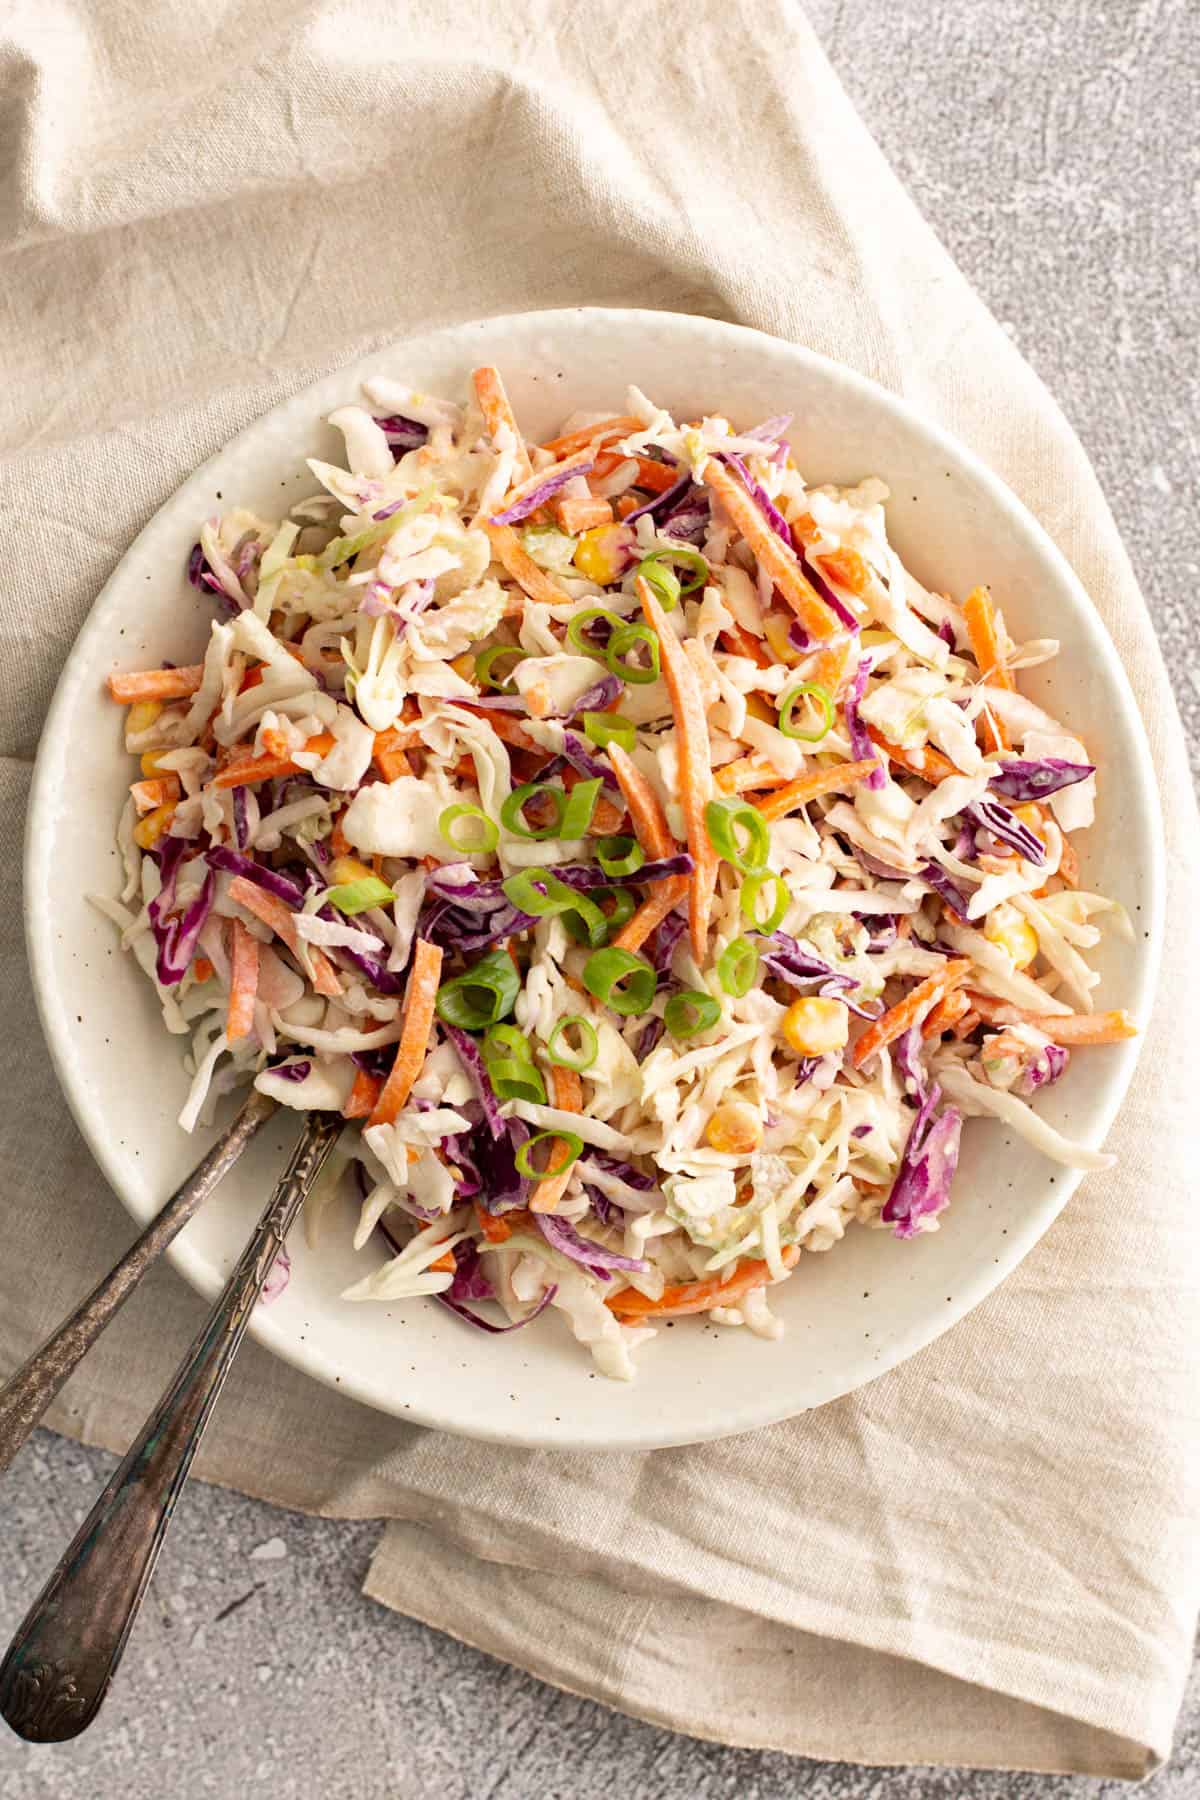 A wide bowl filled with coleslaw and two salad servers.